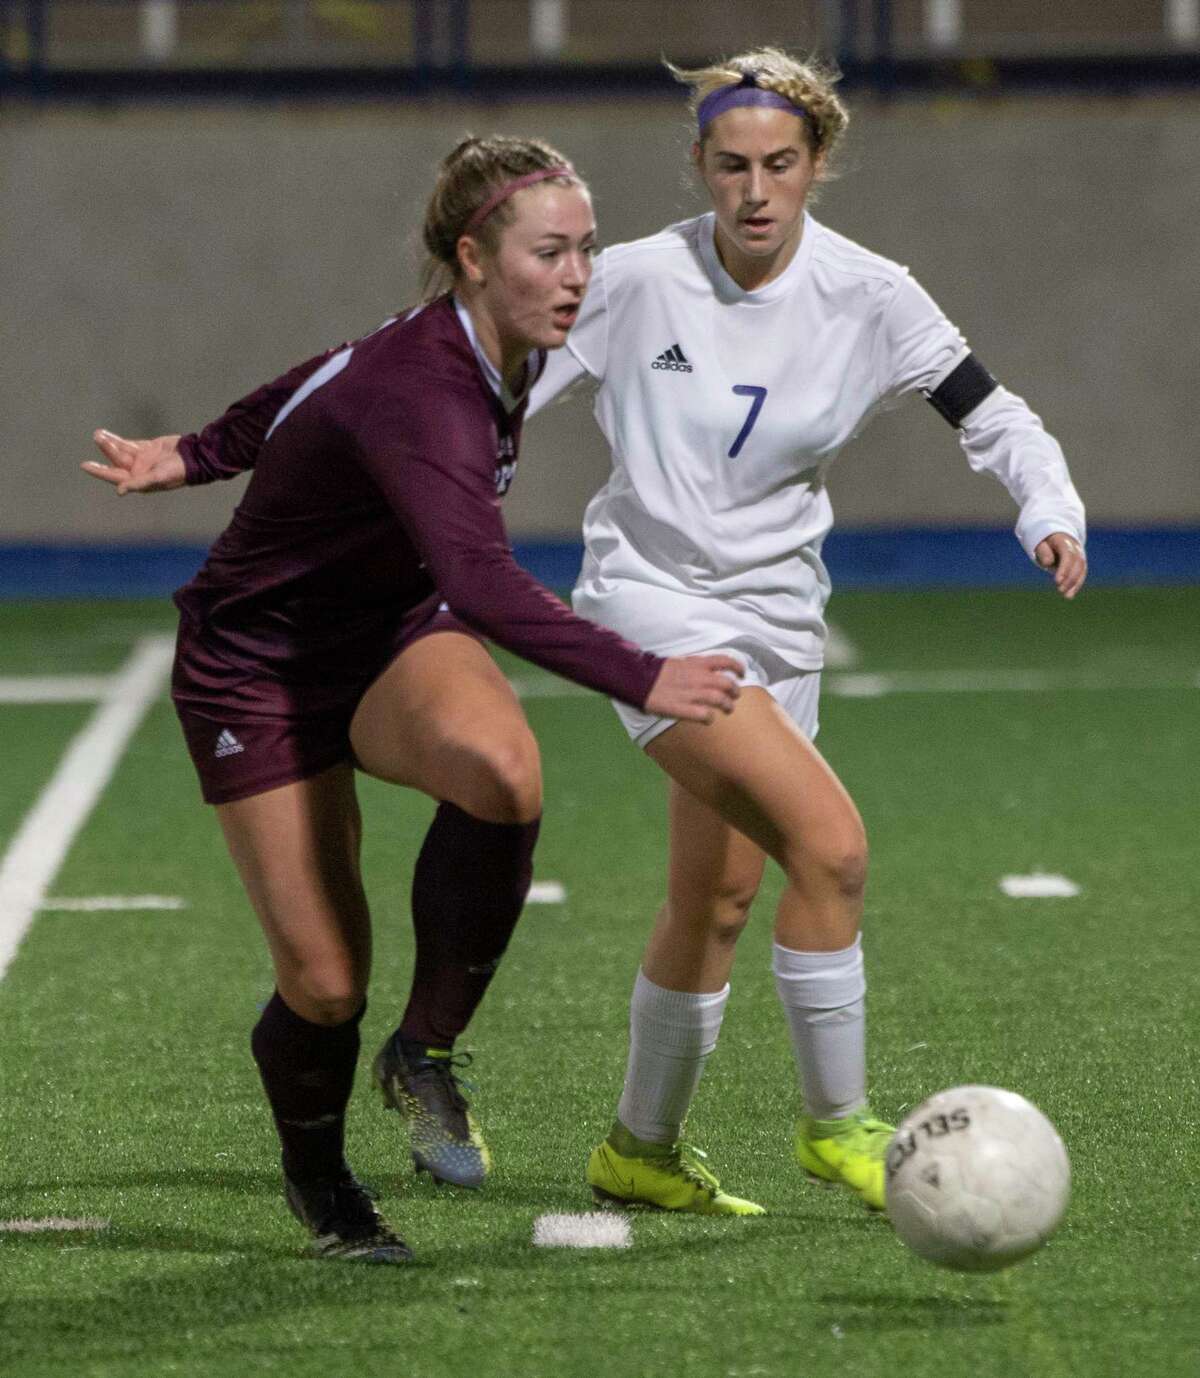 Lee High's Rylee Low looks to pass as Midland High's Kinsey Hill defends 03/05/2021 at Grande Communications Stadium. Tim Fischer/Reporter-Telegram